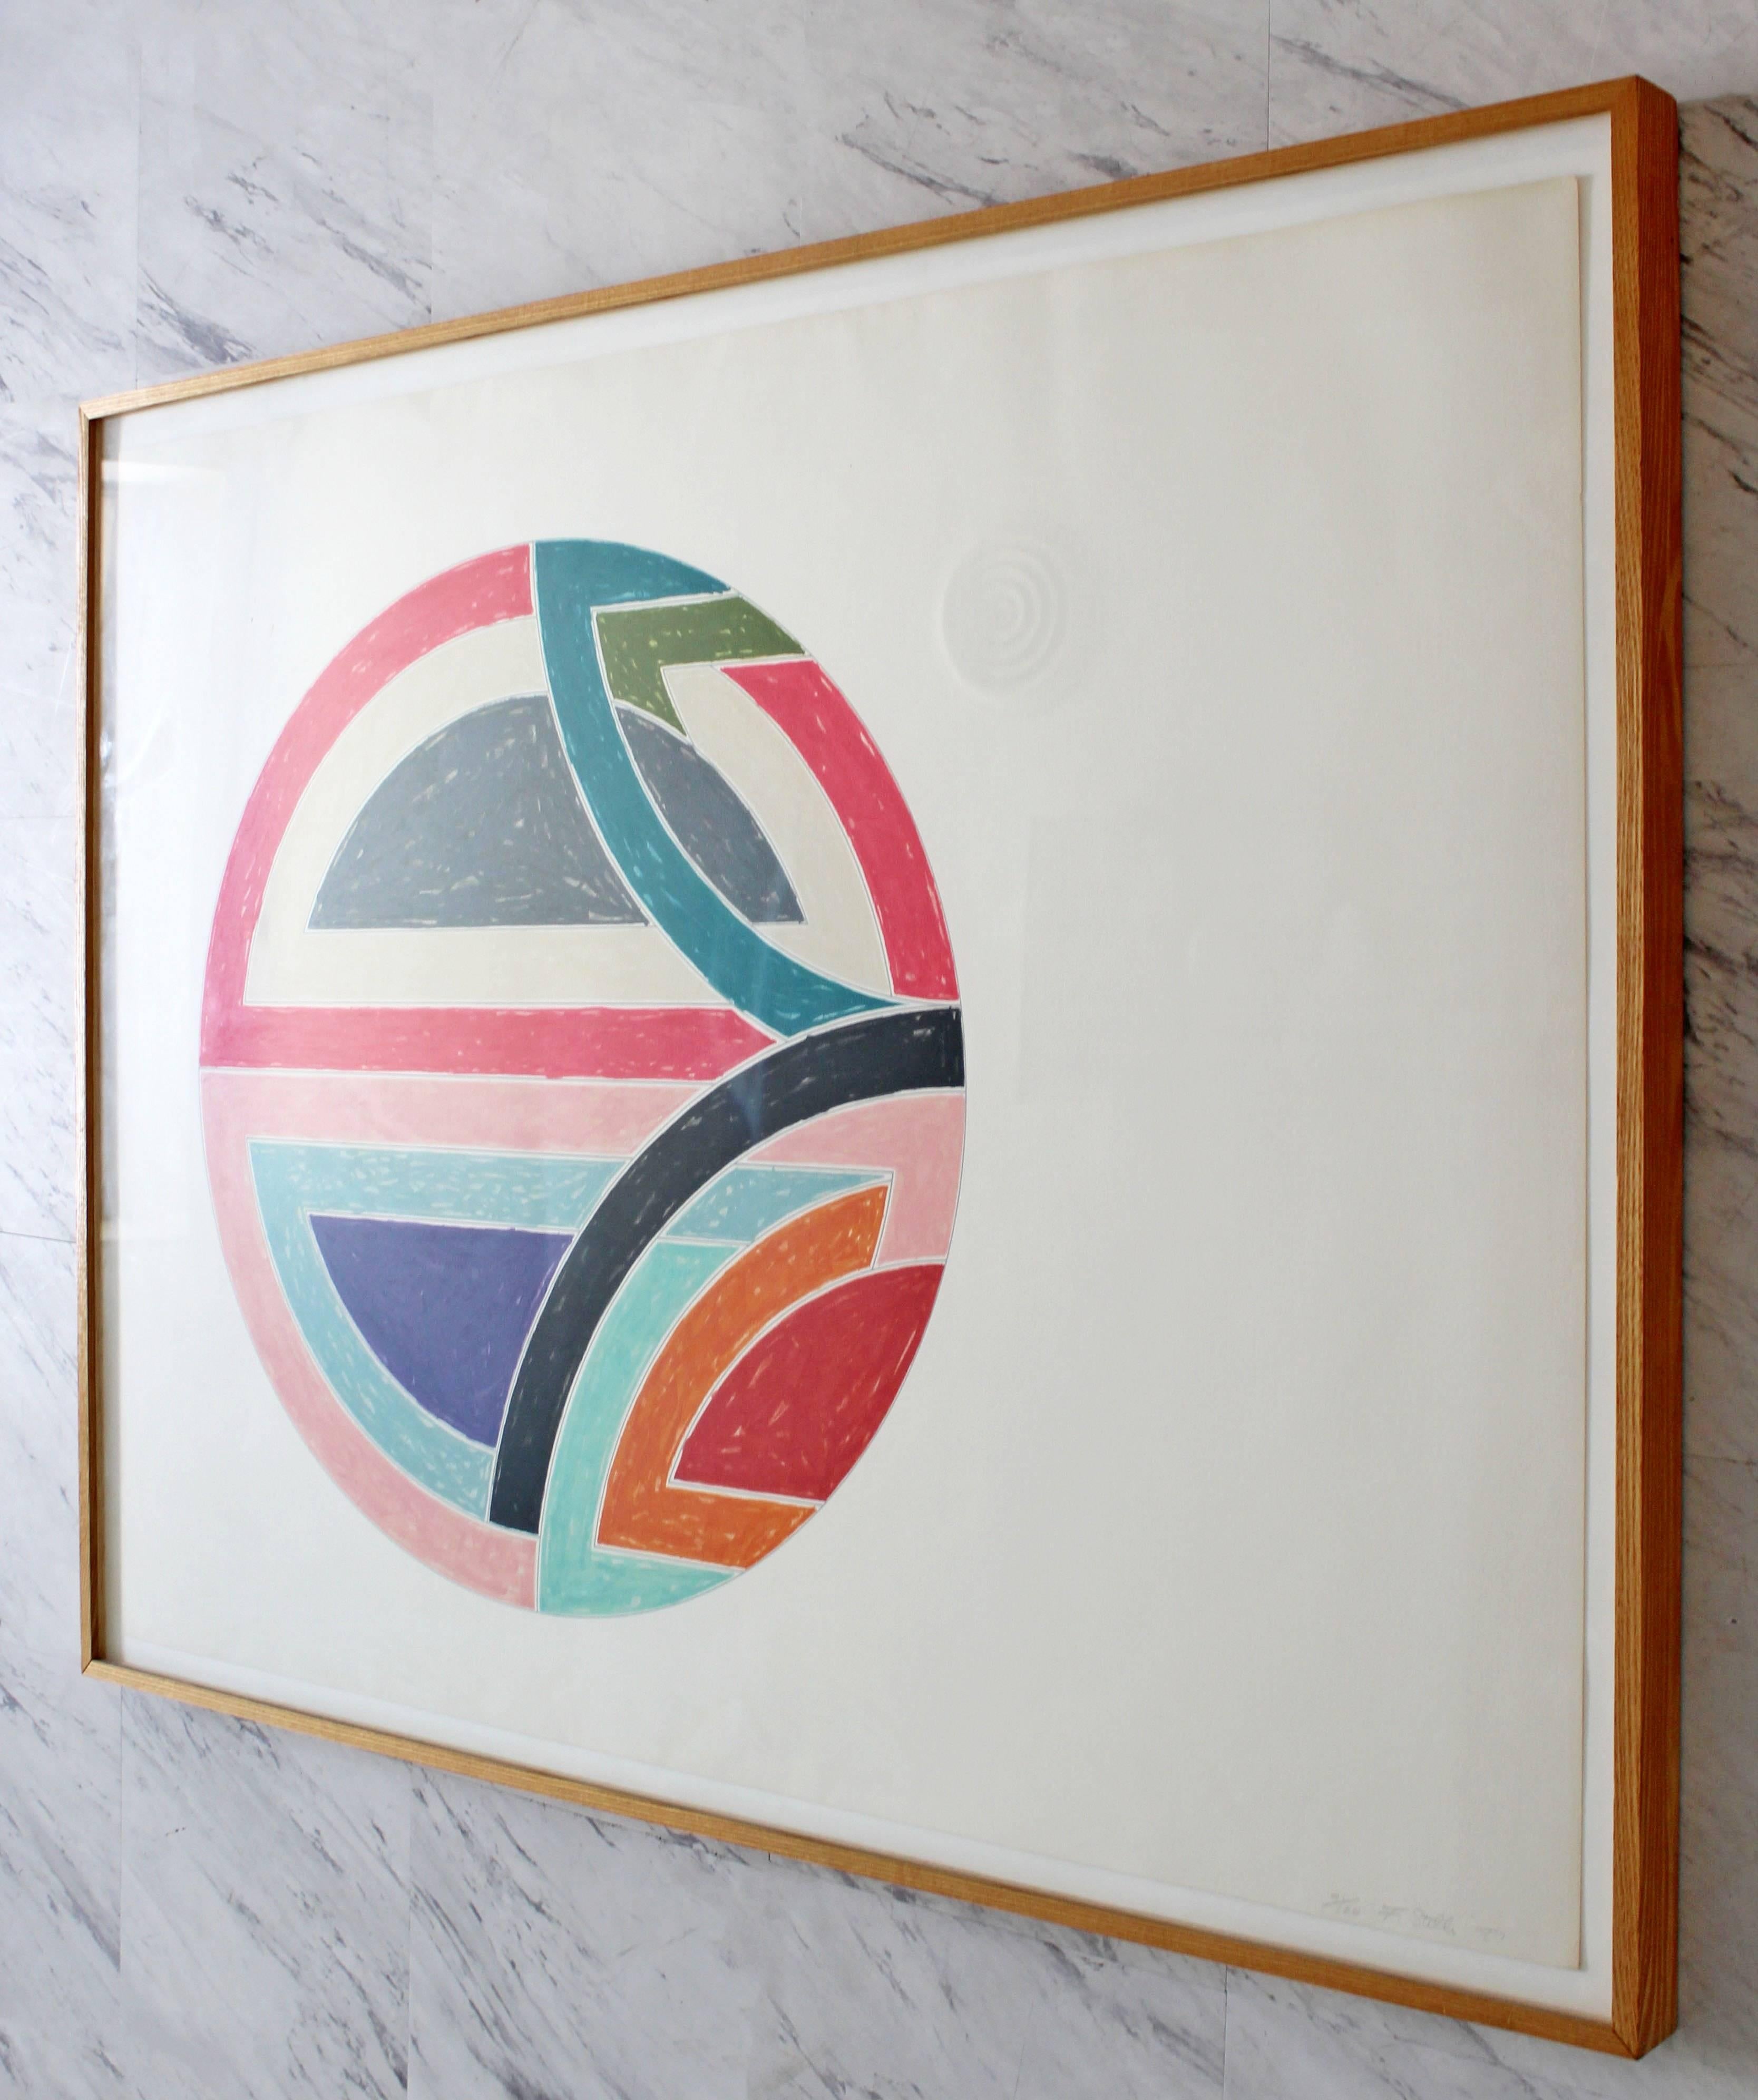 American Contemporary Frank Stella Sinjerli Variations 1A Signed Lithograph 1977 9/100